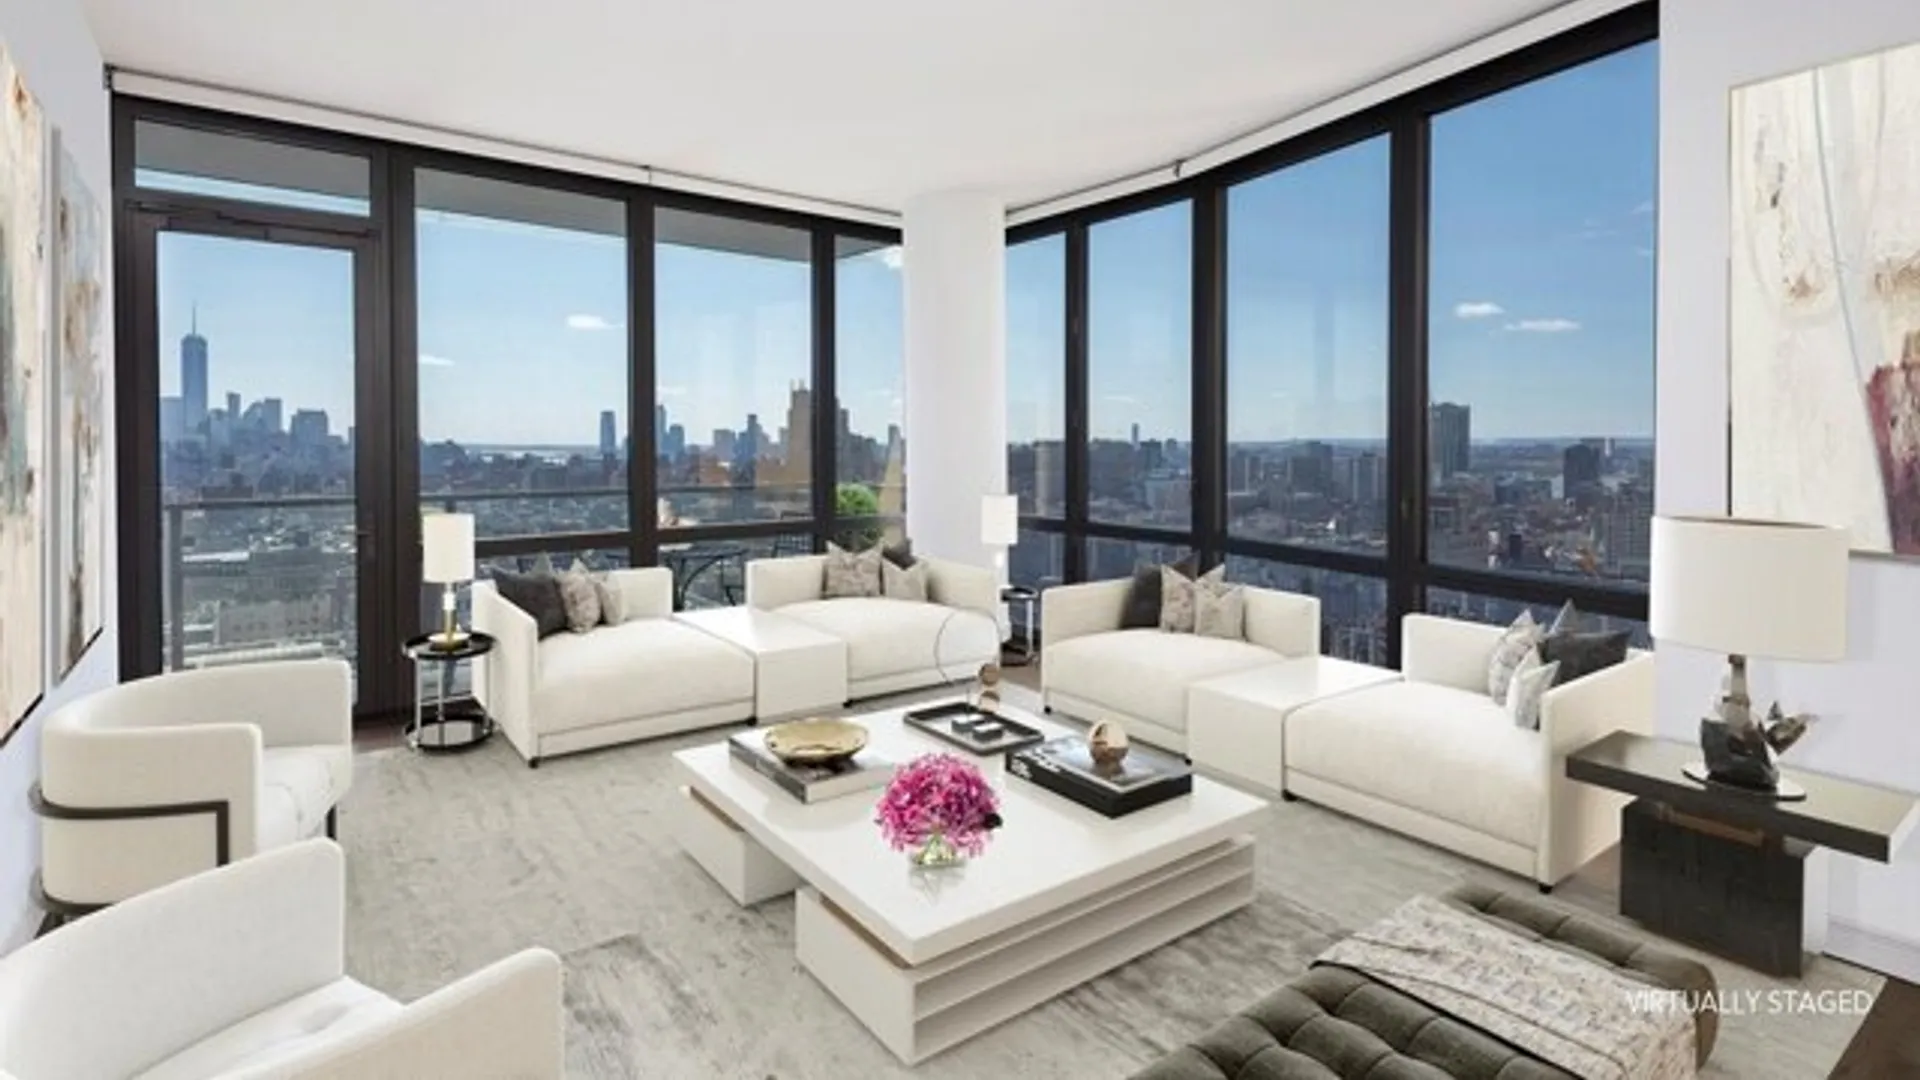 Chelsea Stratus, 735 6th Avenue, New York, NY 10001, USA | 2 bed apartment for rent